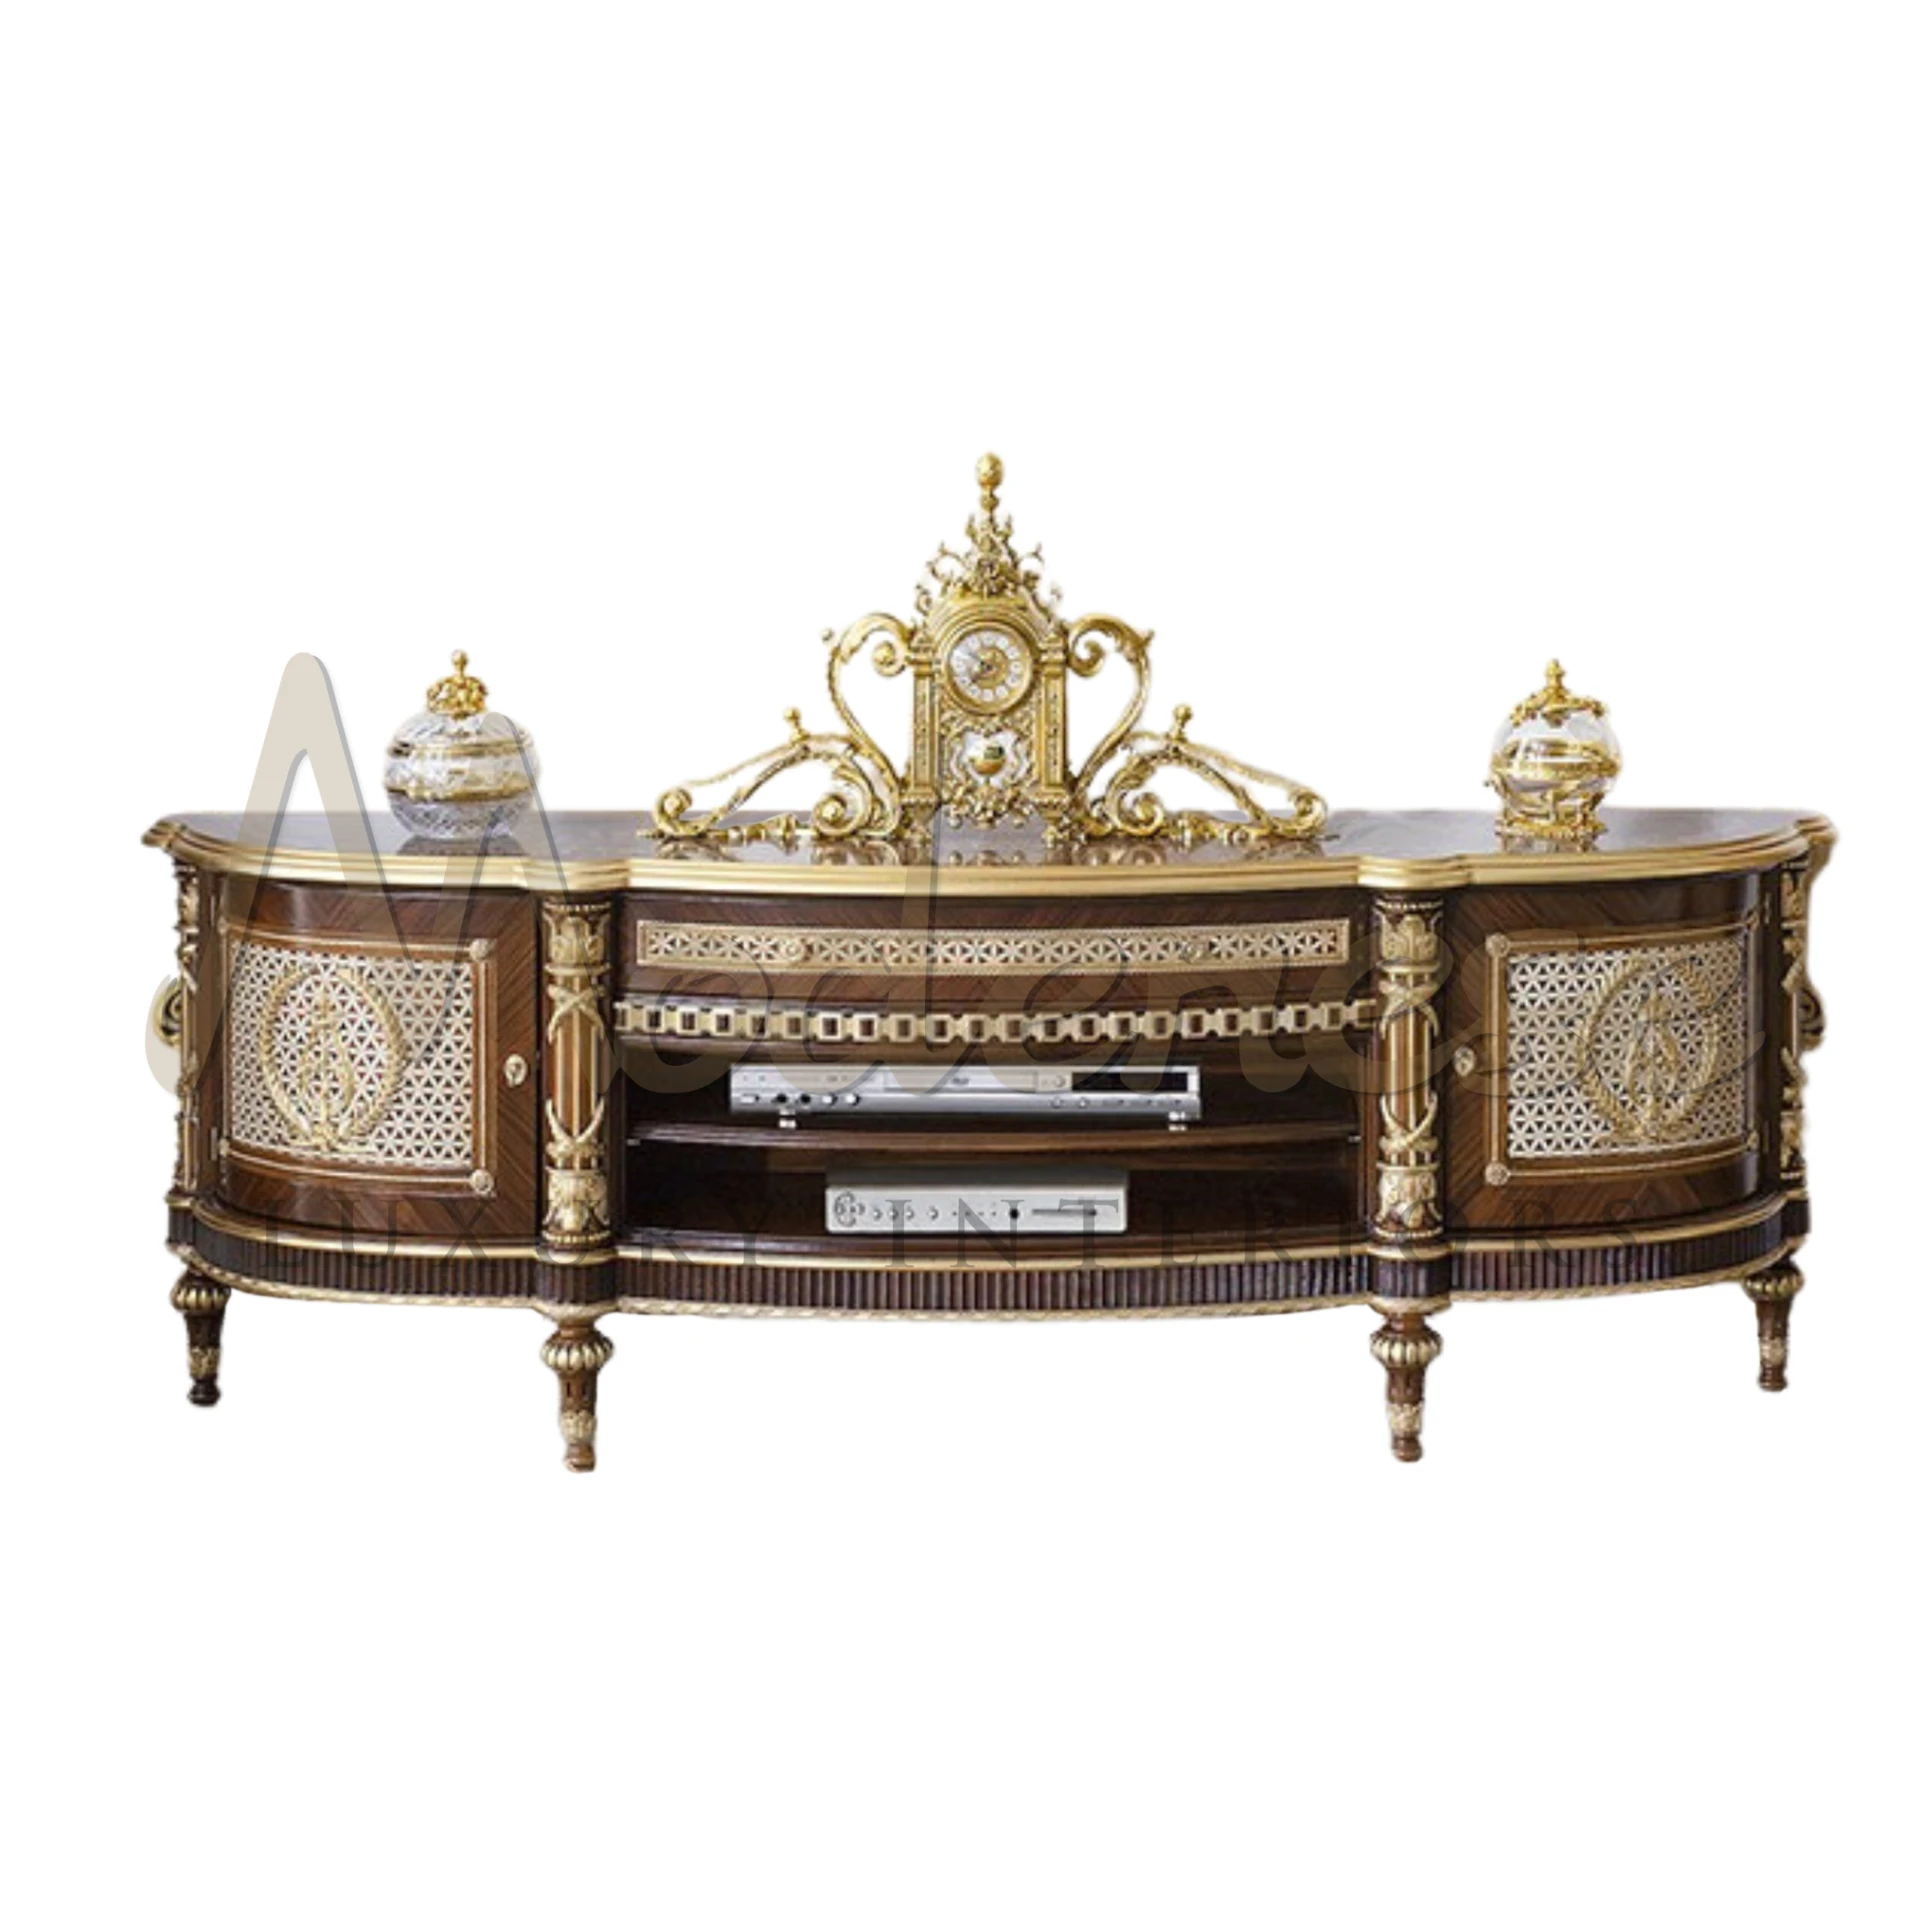 Italian-crafted Luxury Baroque TV Stand, with optional gold leaf carving, embodying the essence of luxury furniture design.
